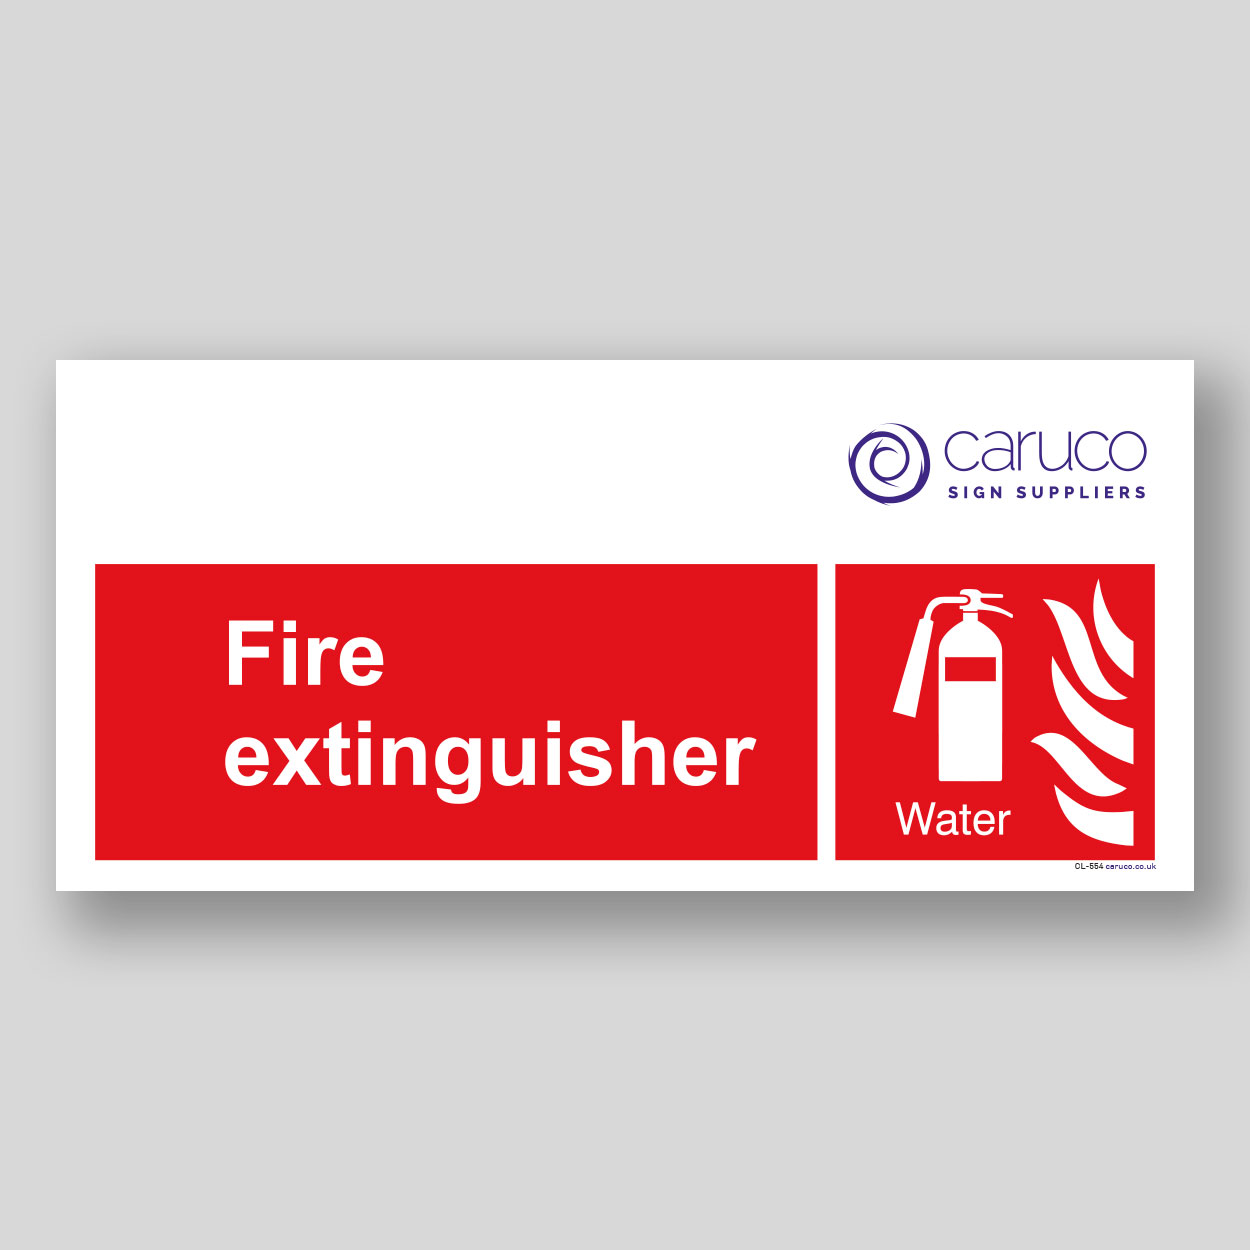 CL-554 Fire extinguisher - water